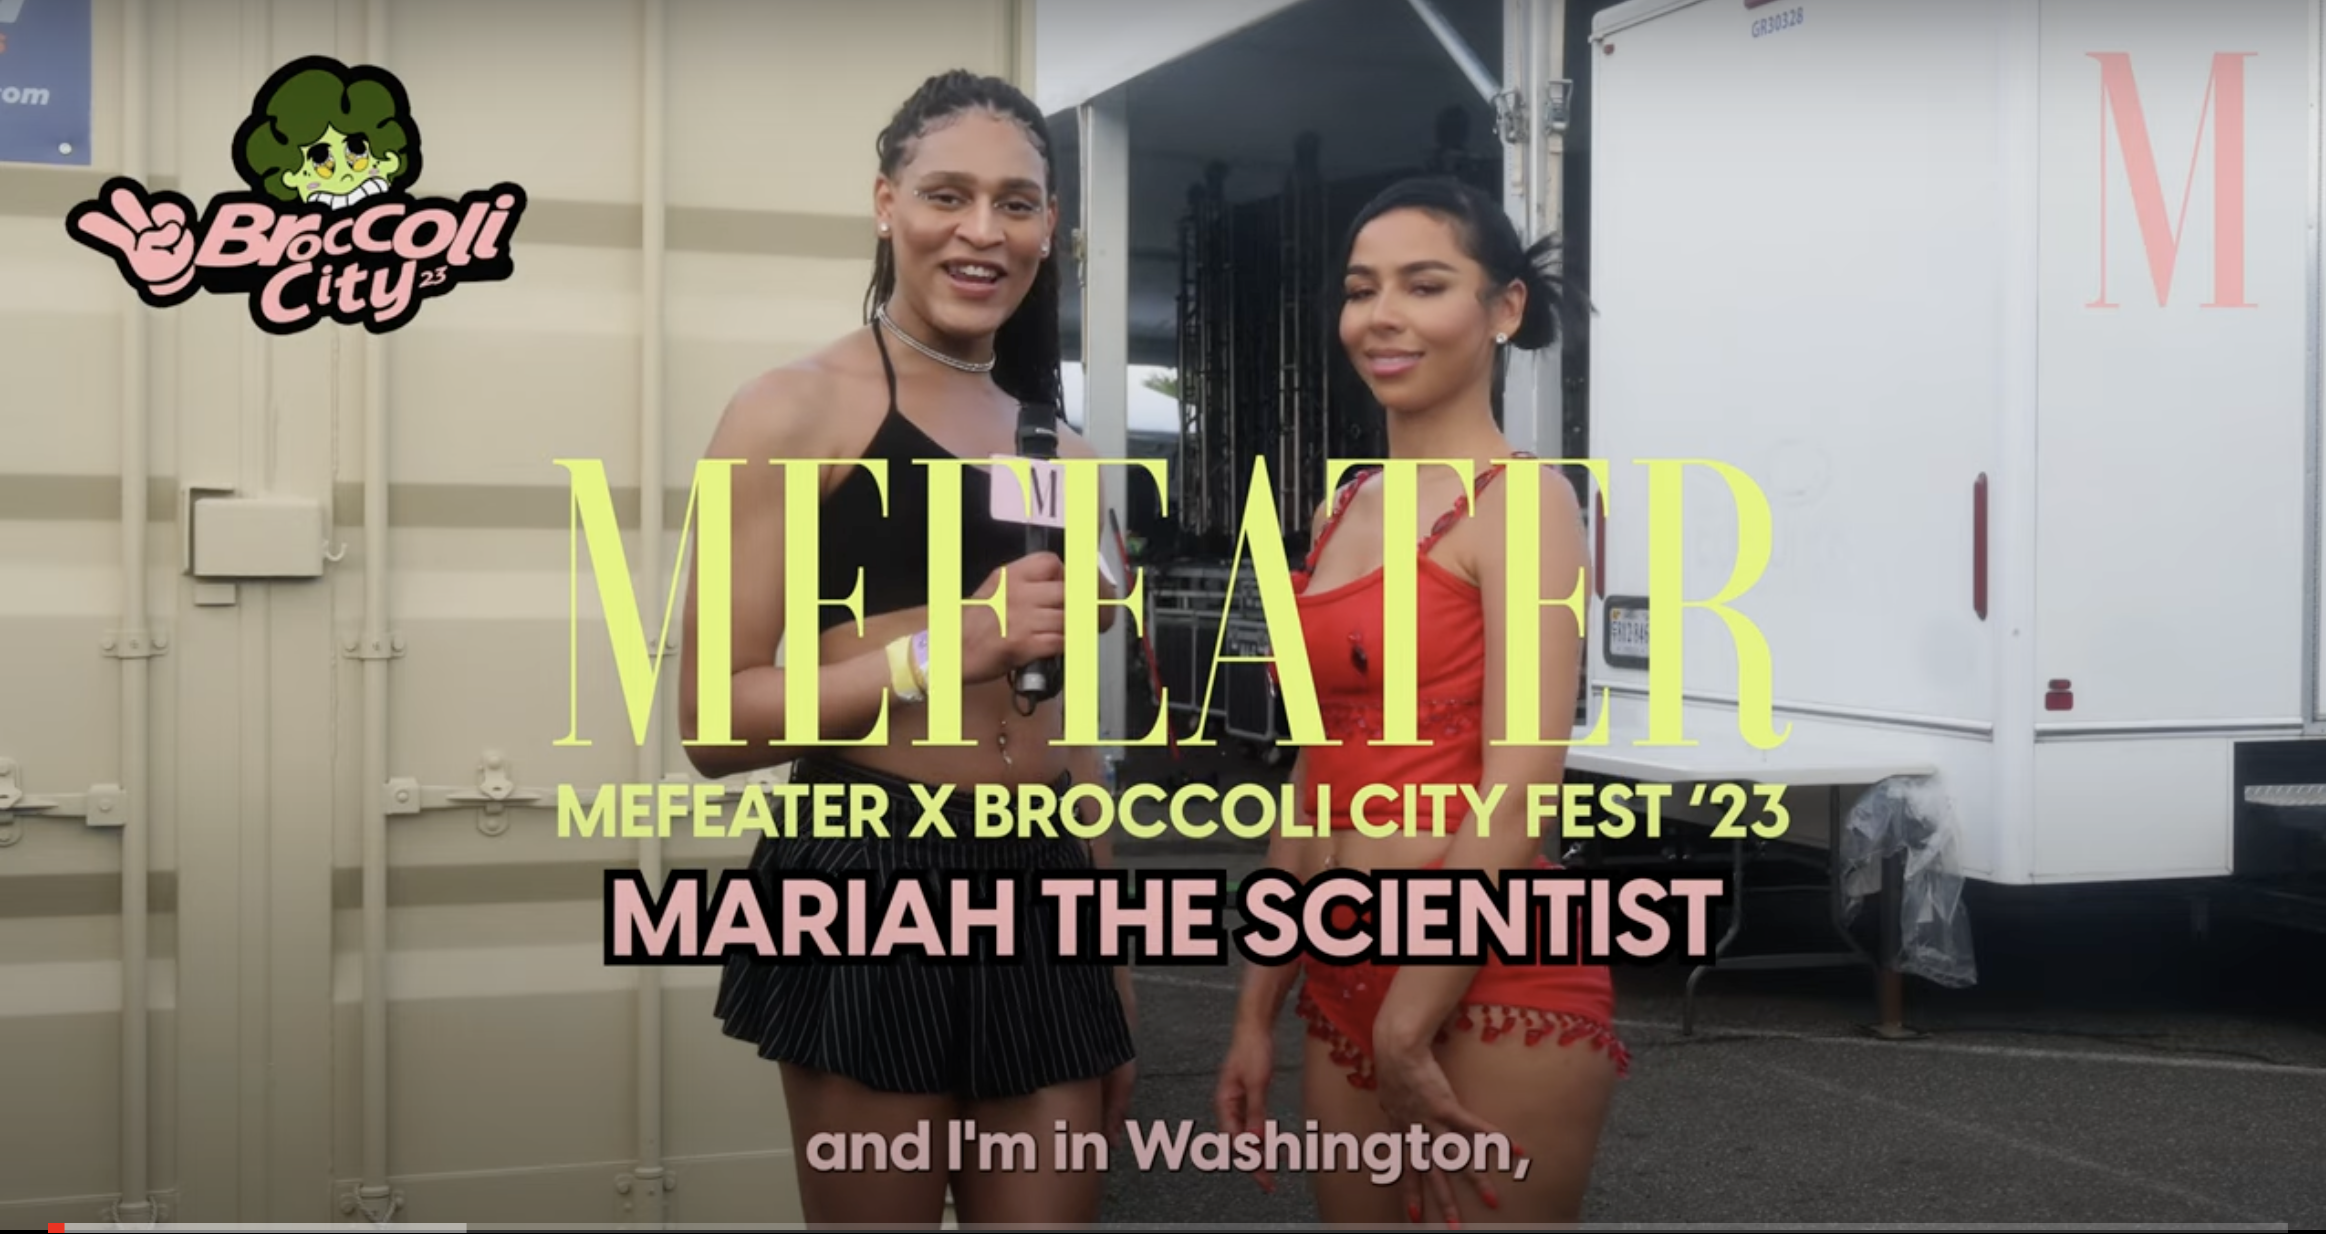 MARIAH THE SCIENTIST INTERVIEW BROCCOLI CITY 2023